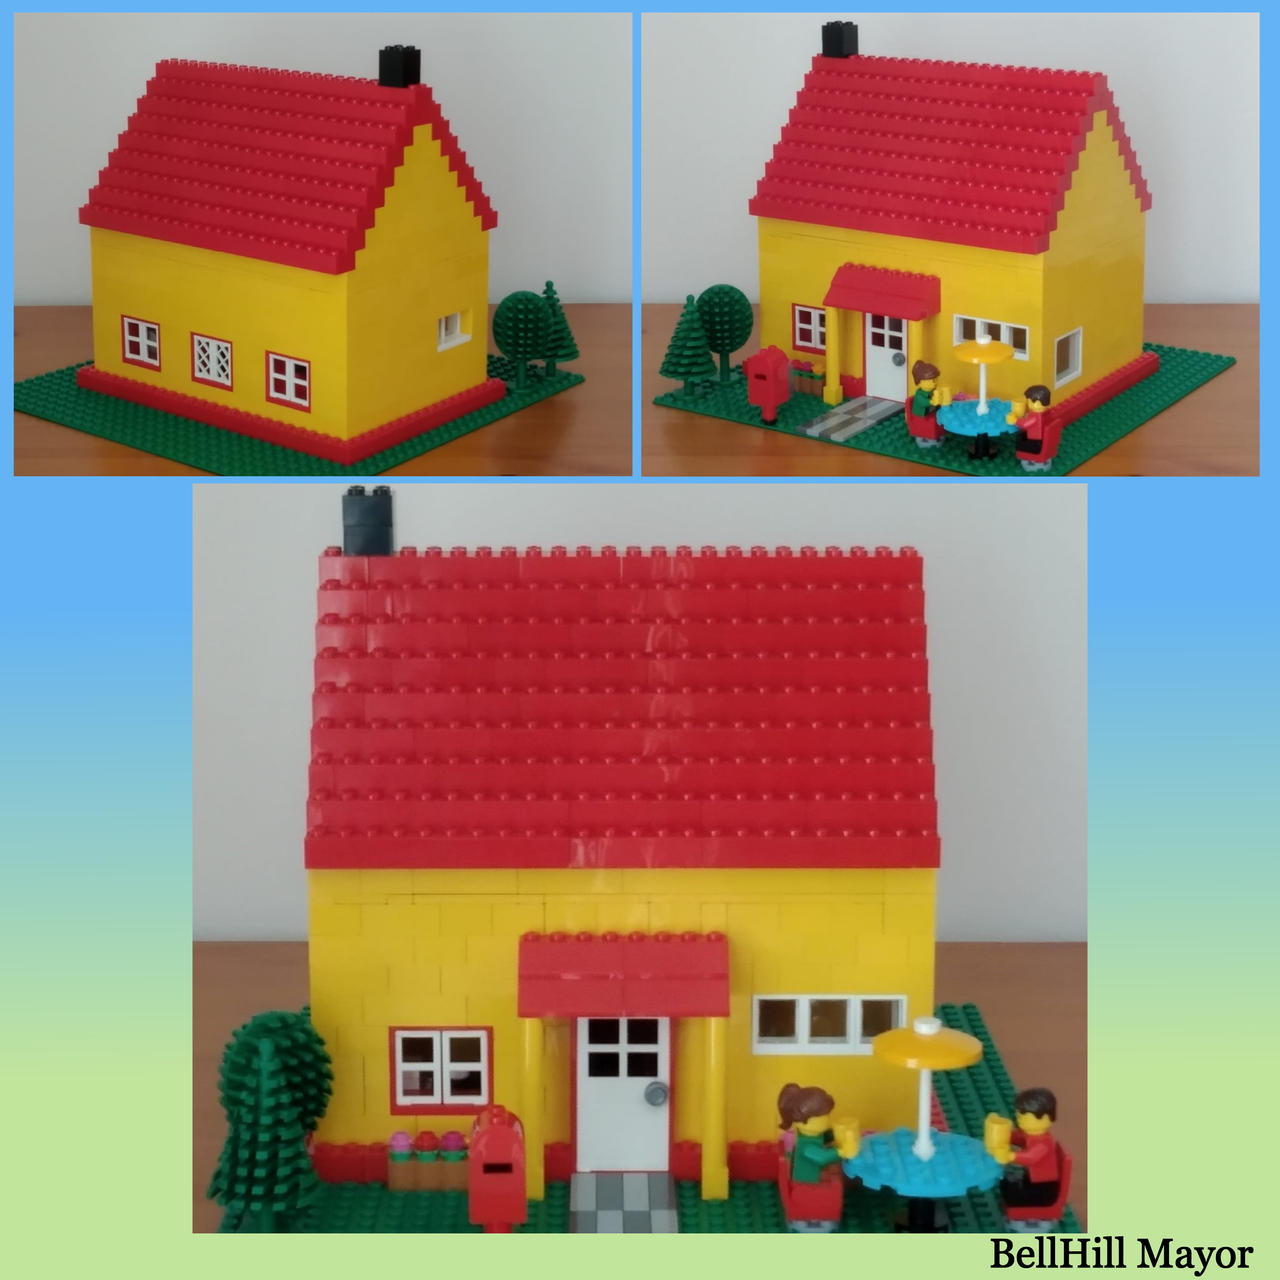 tandpine Soaked Udveksle BellHill Mayors Yellow Retro Lego House P1 by BellHillMayor on DeviantArt